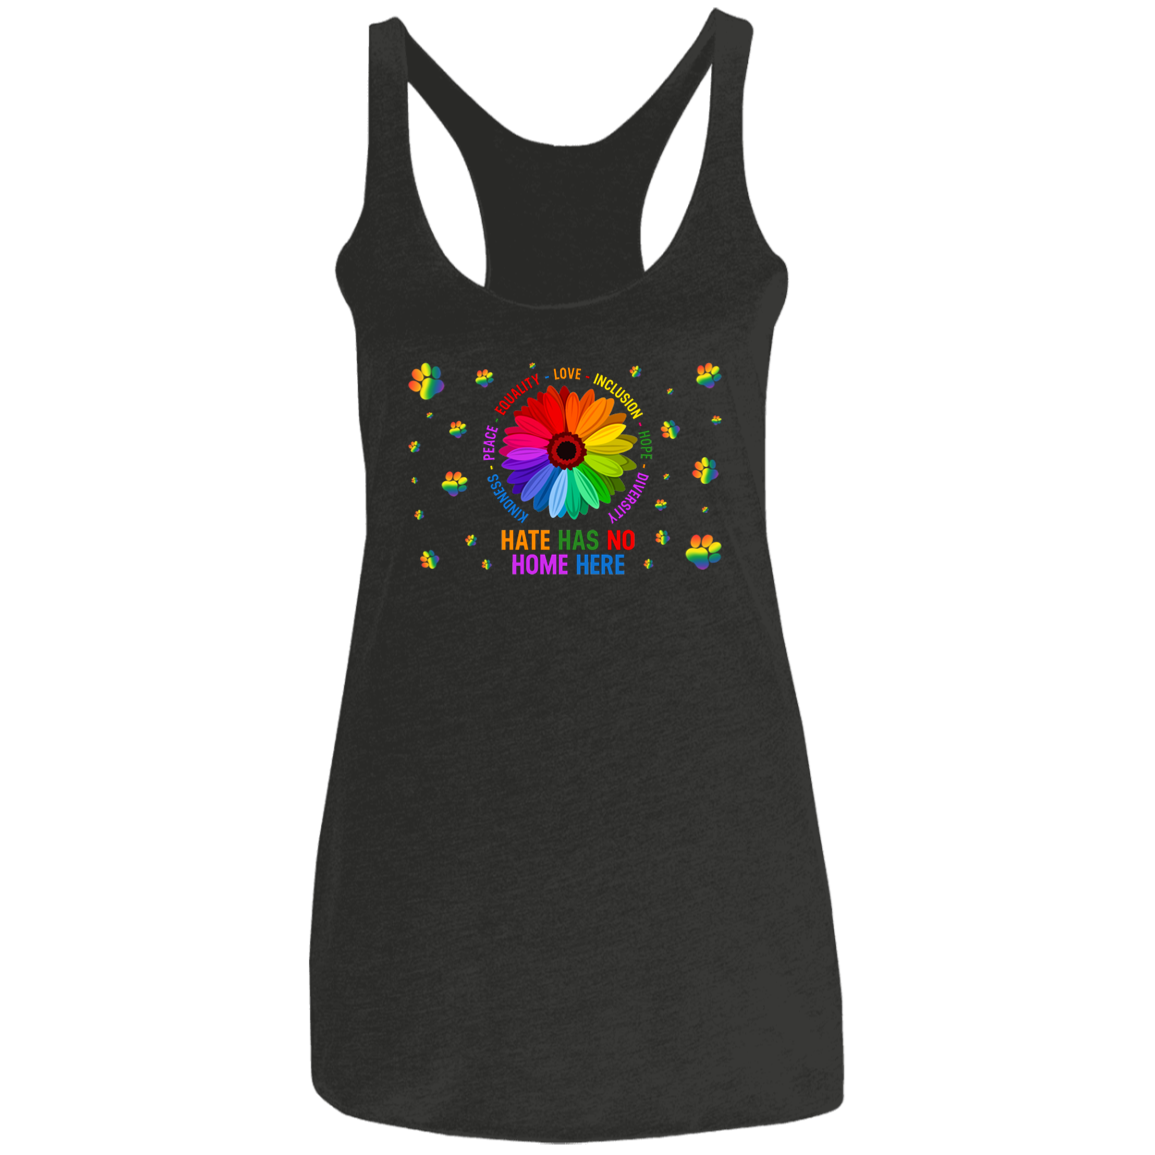 Kindness peace equality love inclusion hope diversity shirt